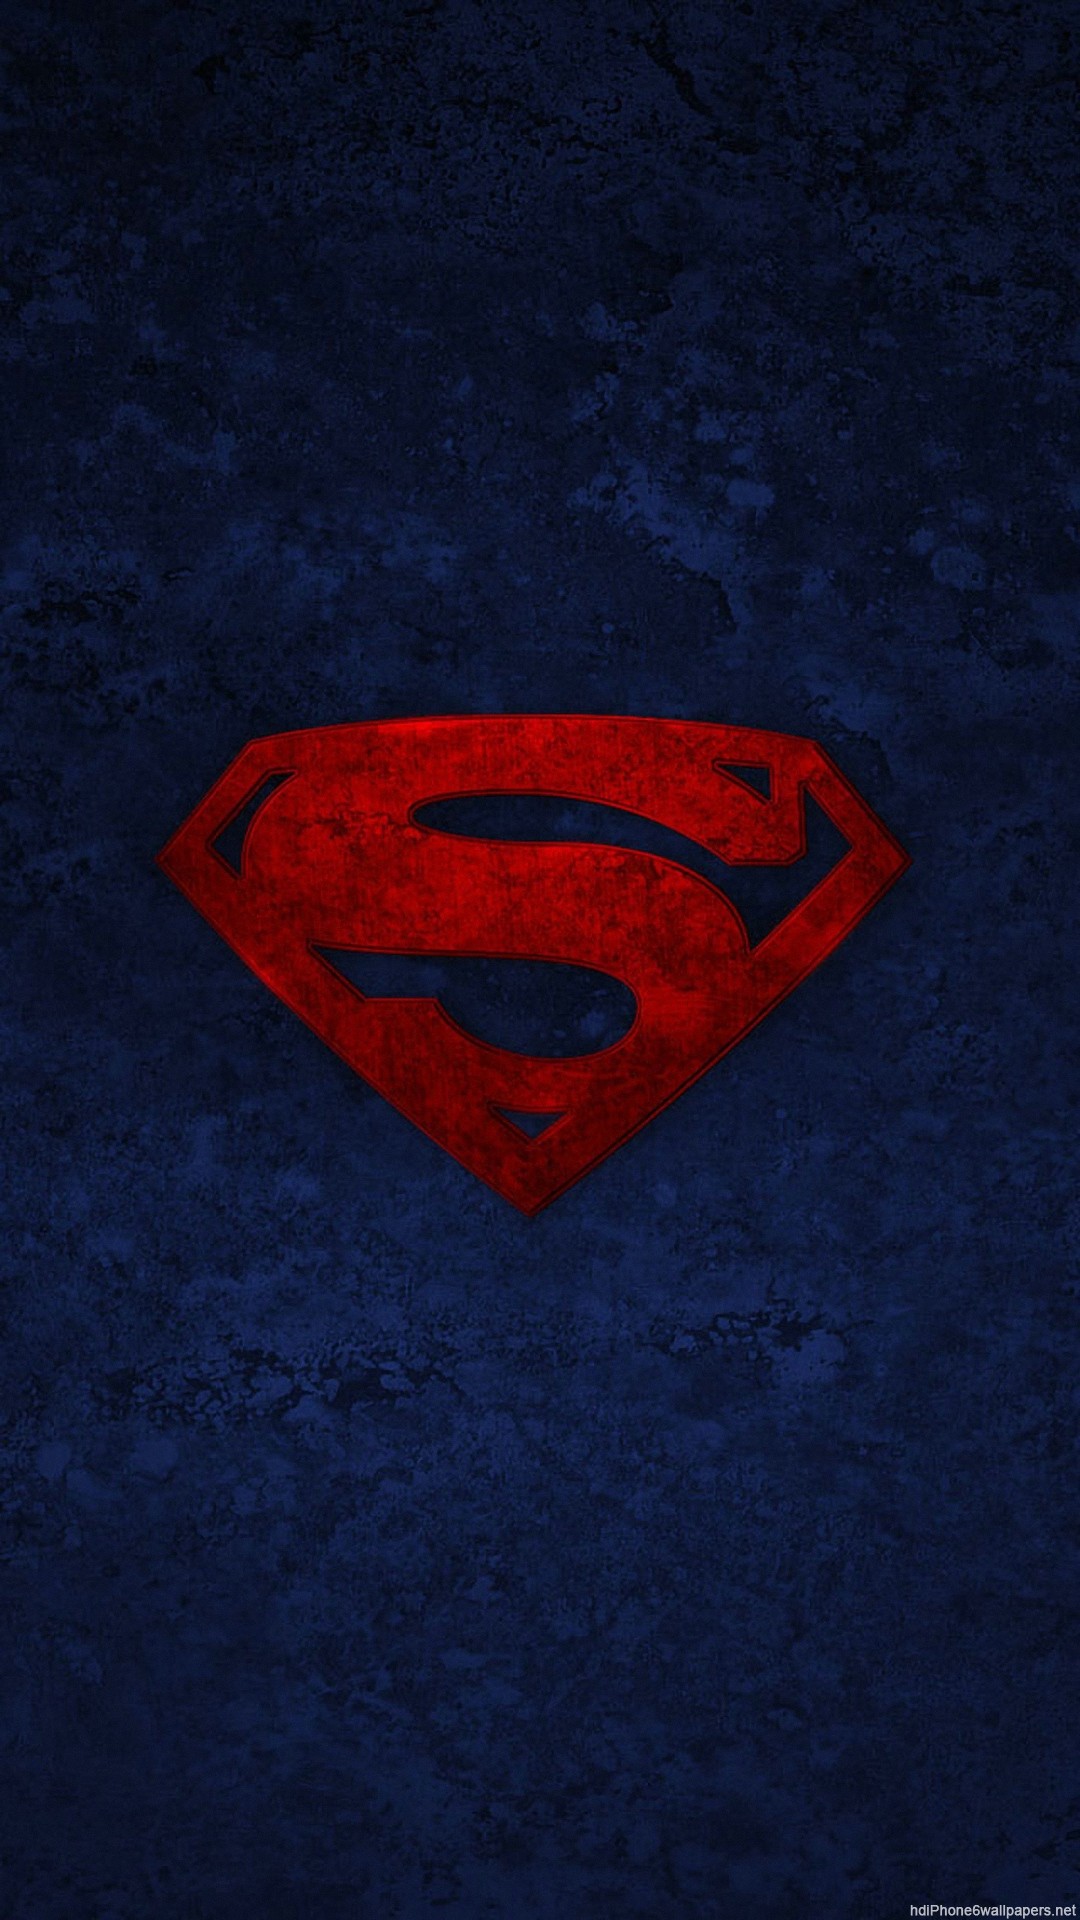 1080x1920  Superman logo iPhone 6 wallpapers HD - 6 Plus backgrounds